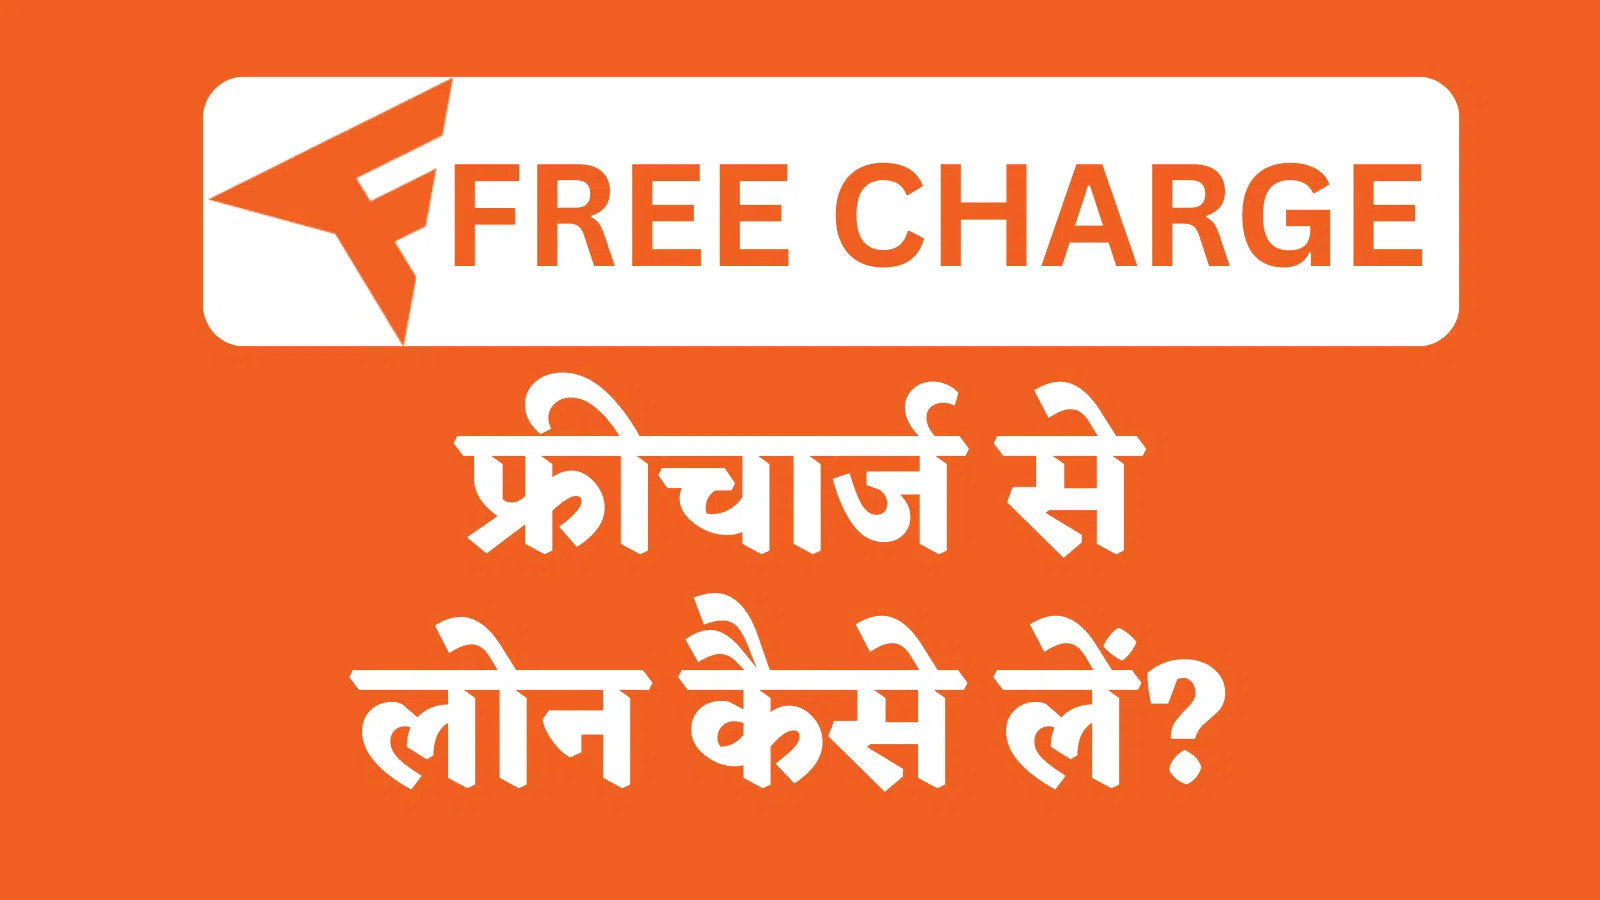 FREE CHARGE se loan kaise le online hindi